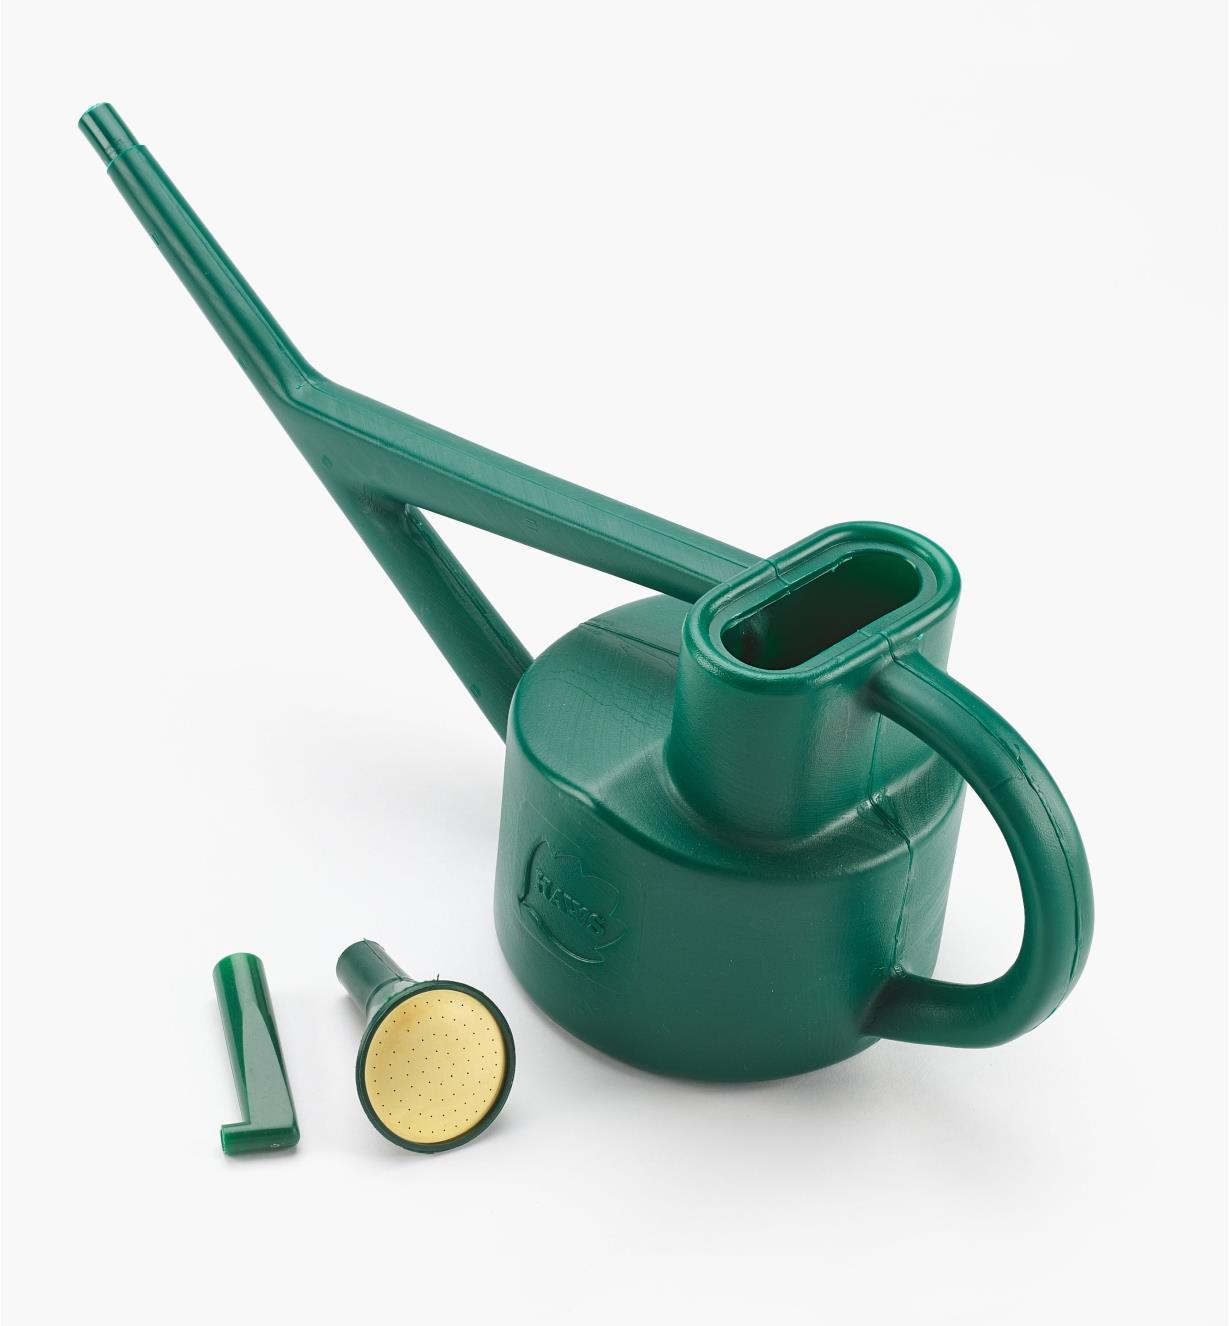 XB923 - Haws 2 Litre Plastic Watering Can